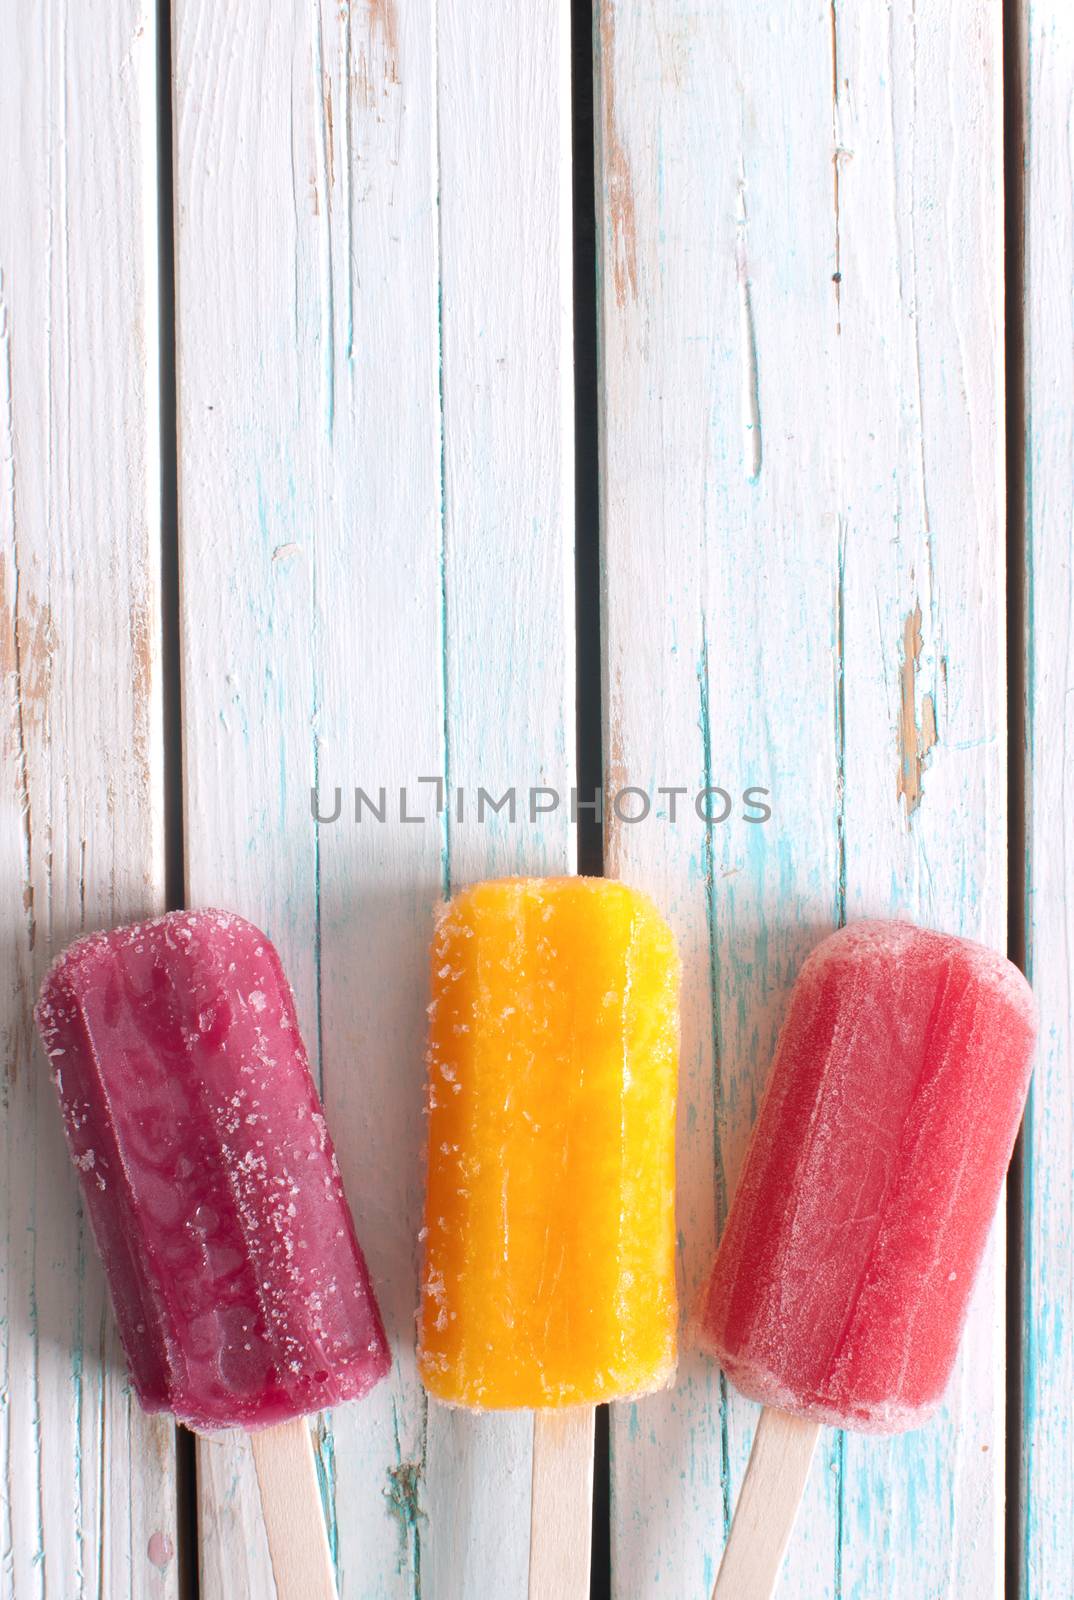 Ice popsicles on wood by unikpix